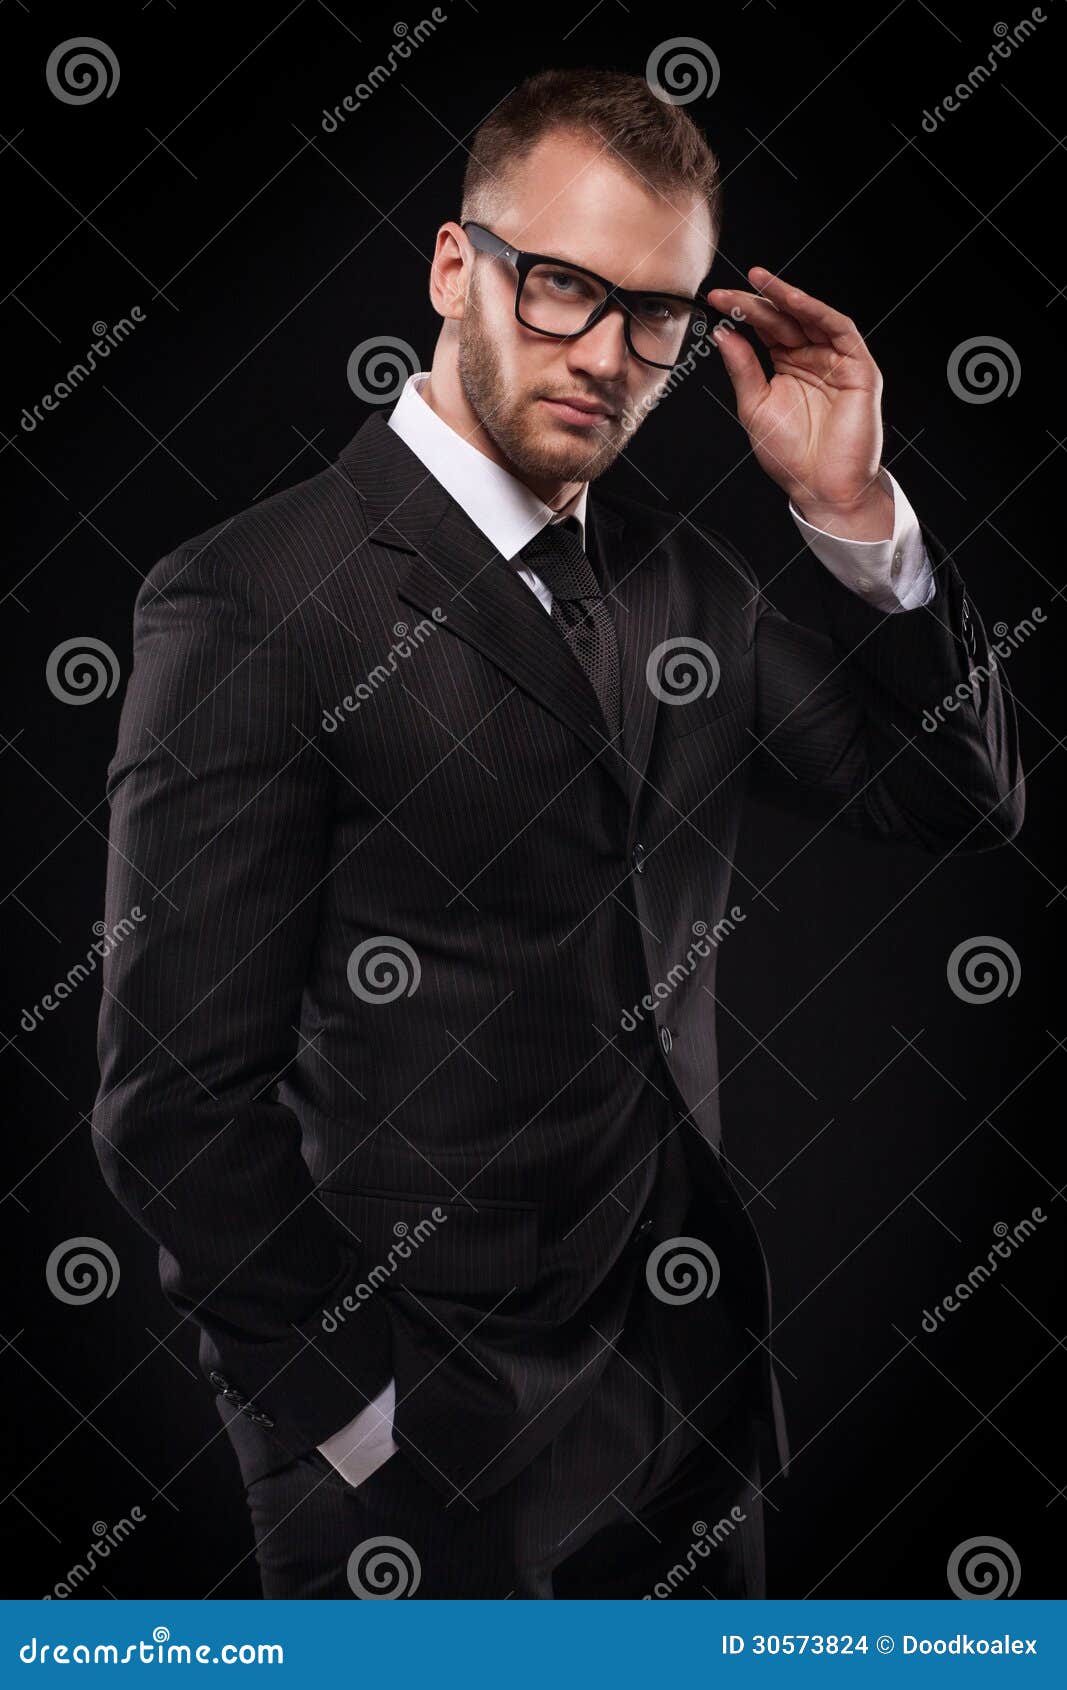 Businessmanman In Black Suit And Glasses Stock Photo - Image of ...